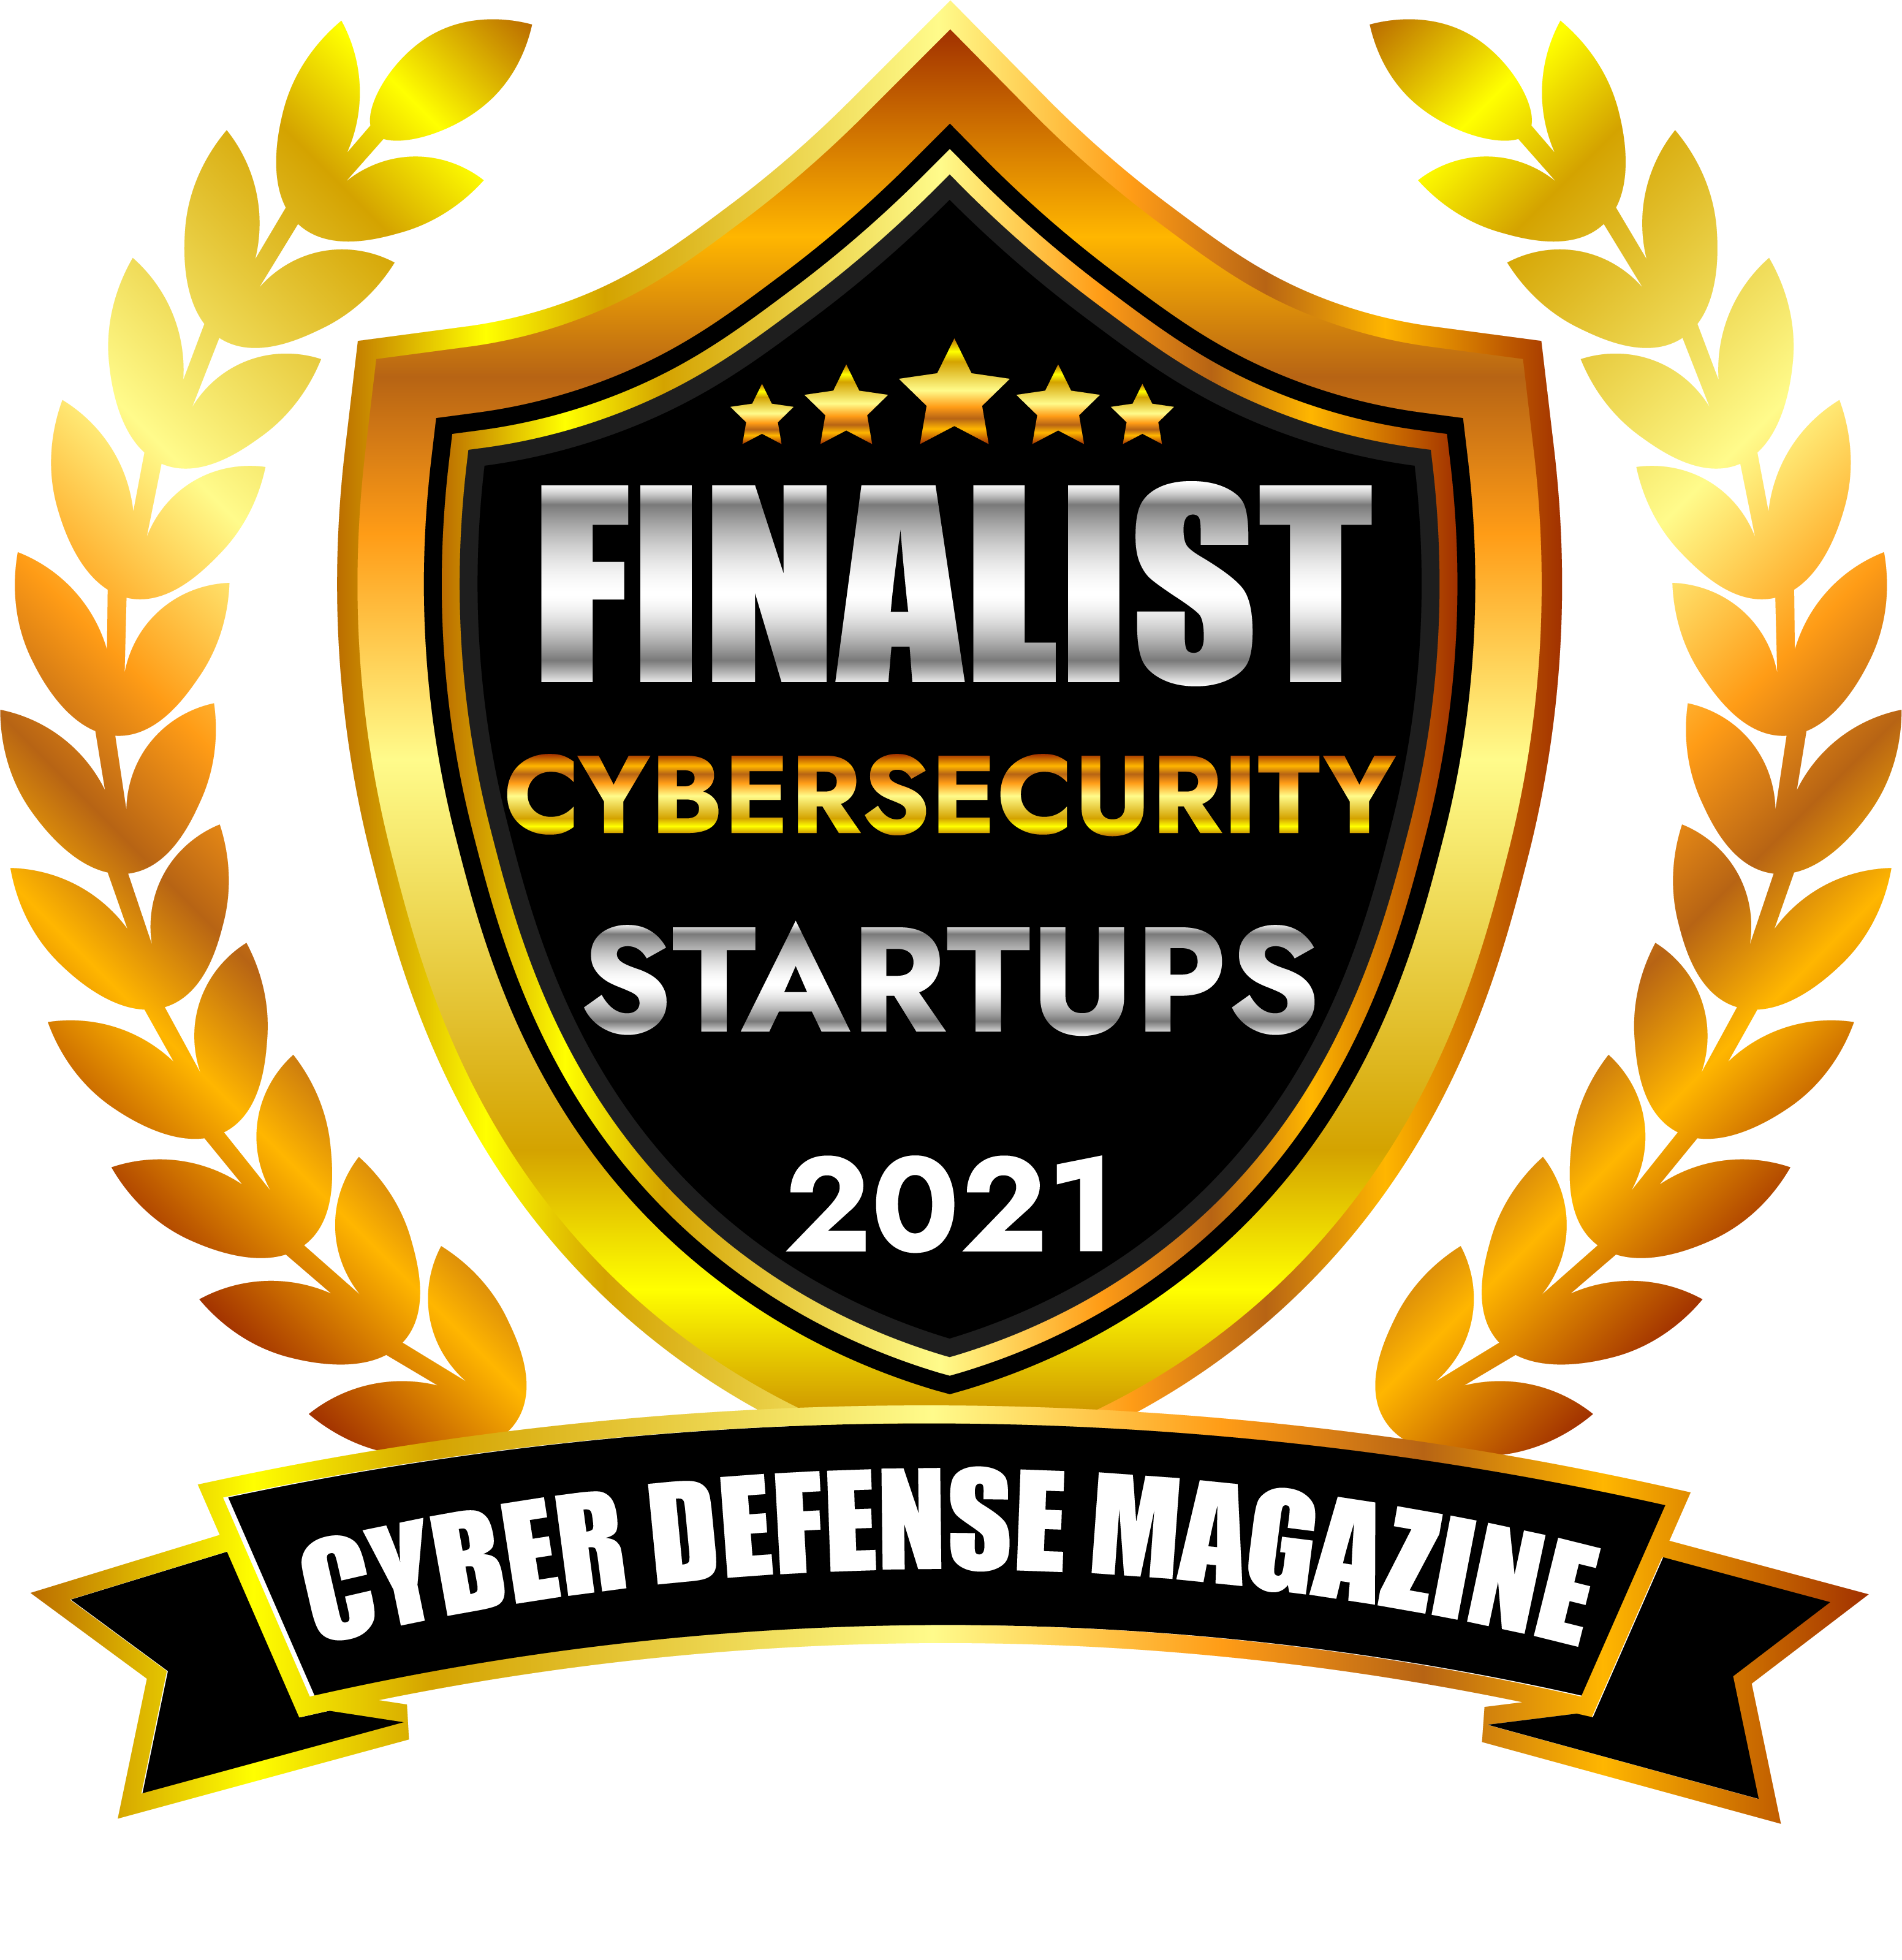 Rezilion named Finalist in Black Unicorn's Top 10 Cybersecurity Startups for 2021 by Cyber Defense Magazine